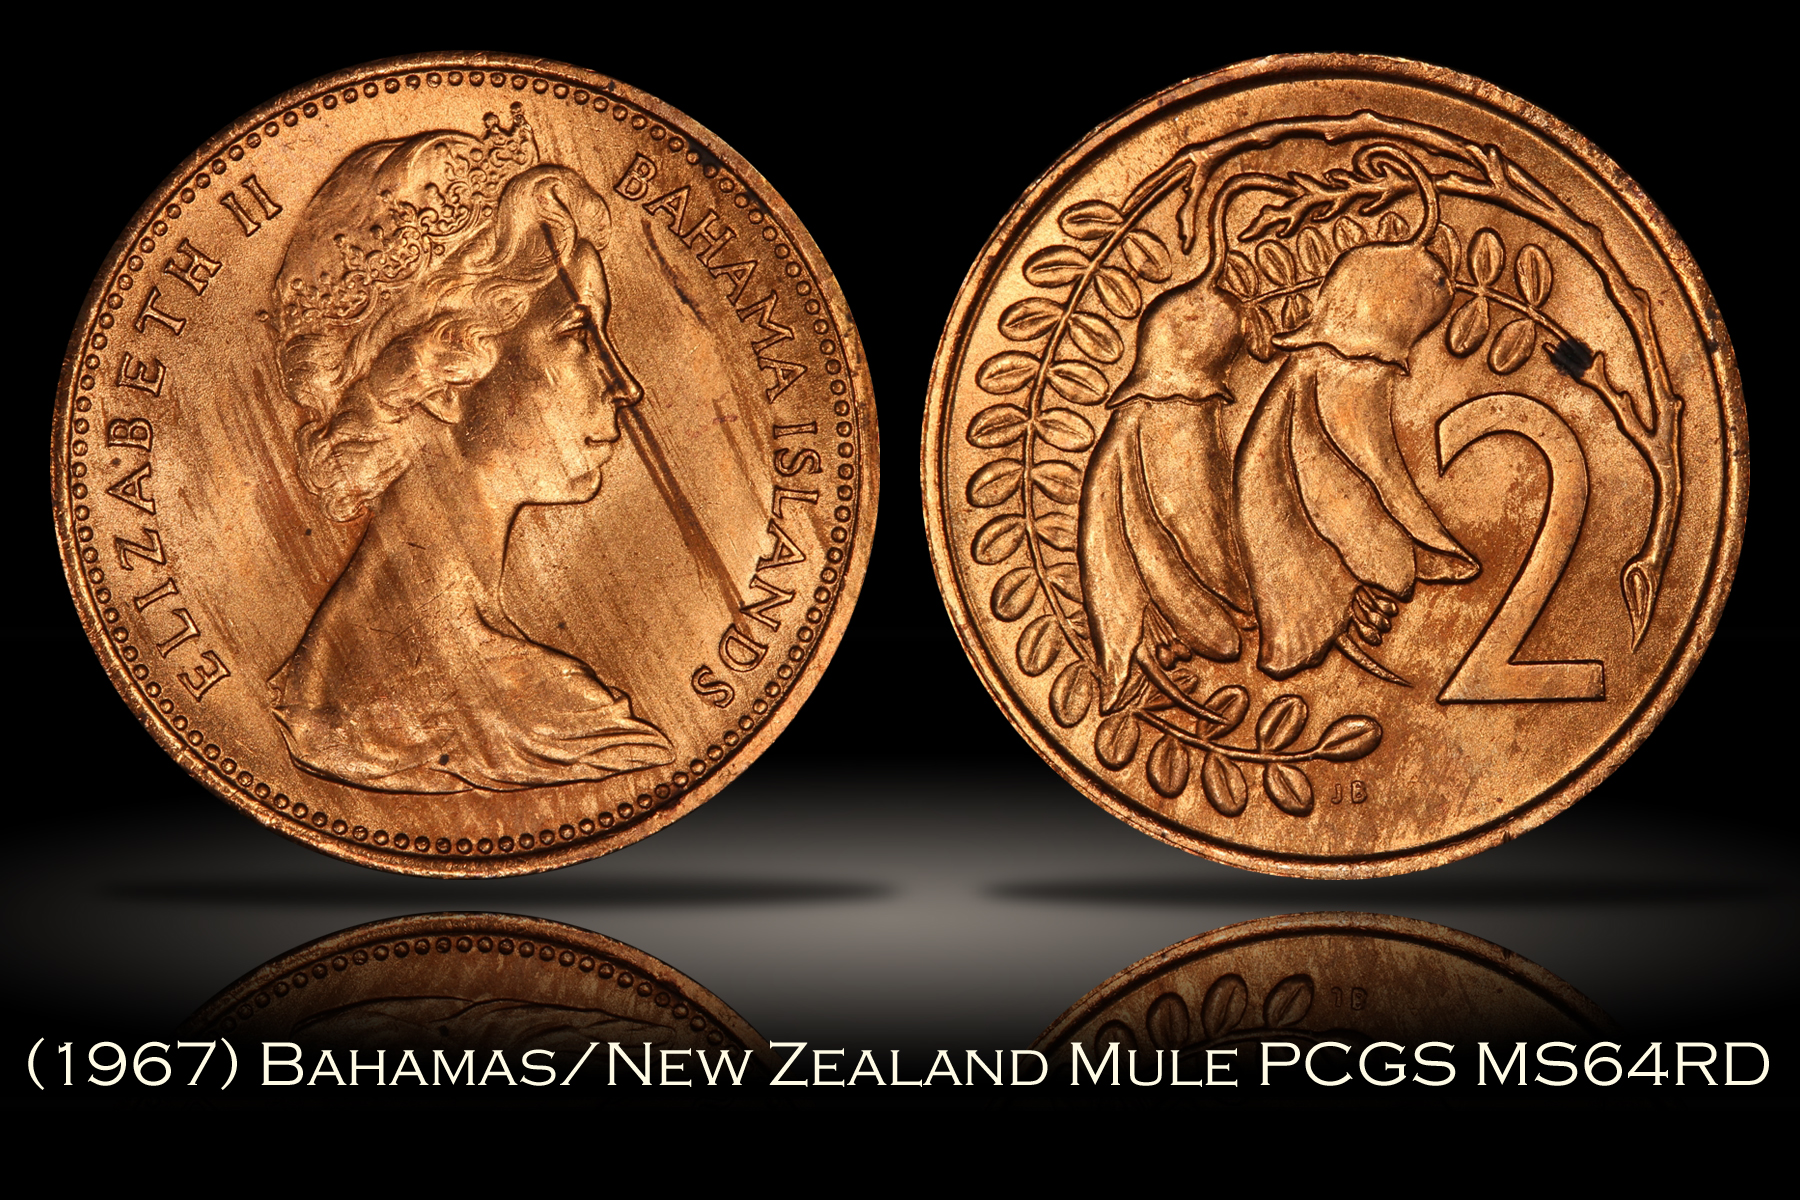 1967 Bahamas New Zealand 2 Cent Mule PCGS MS64RD 30th Ann. Label